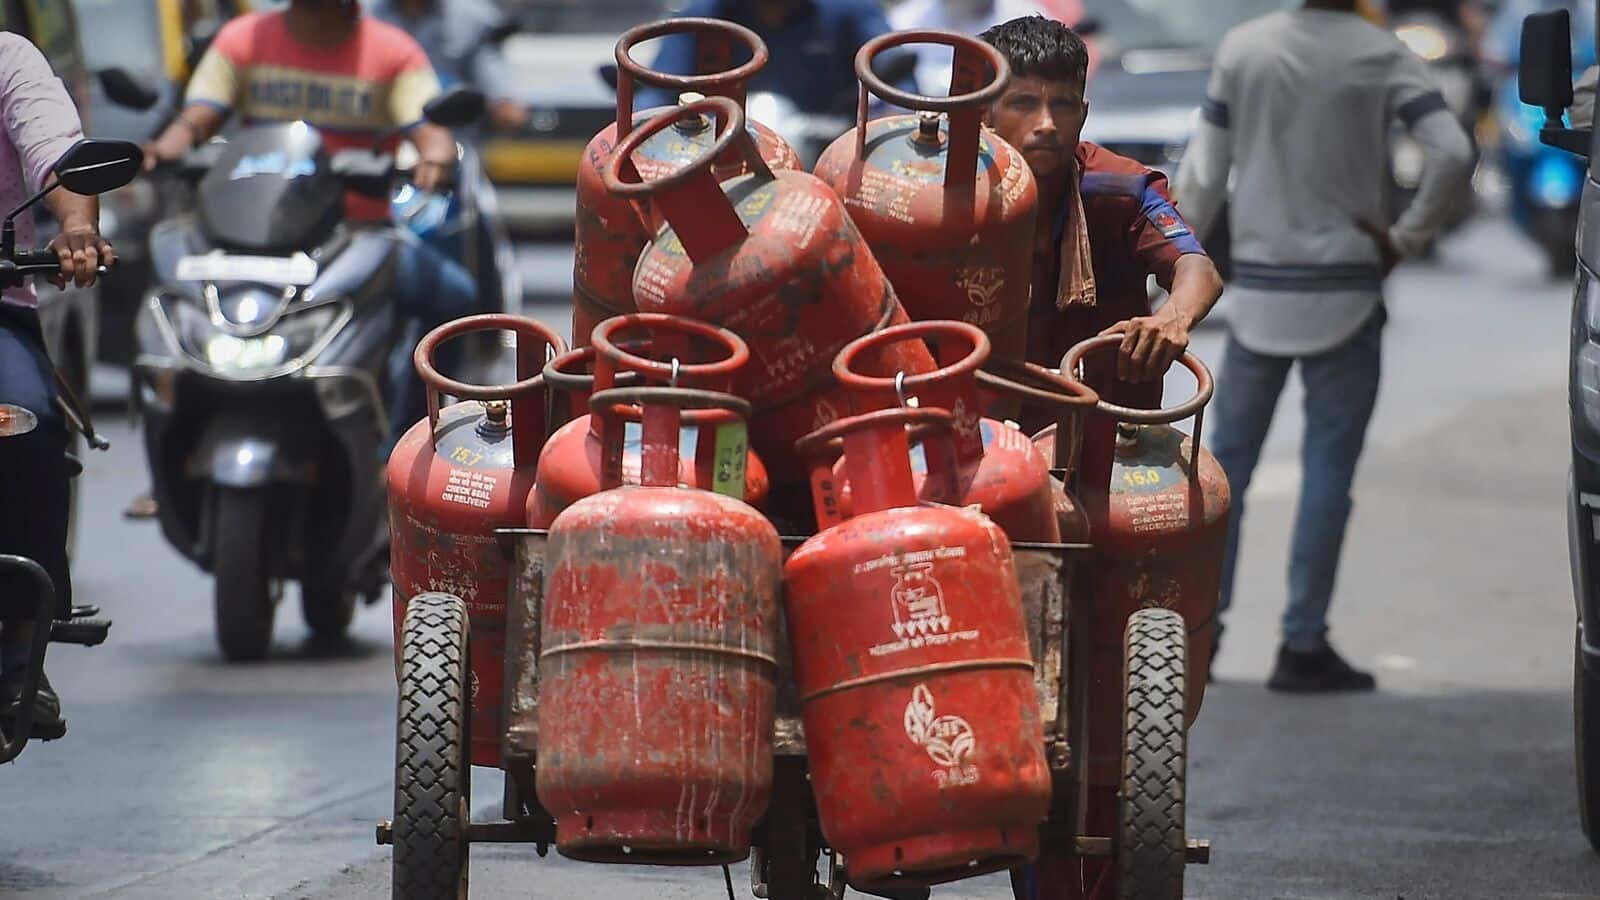 Union Cabinet Approves ₹200 Substantial Reduction in LPG Prices